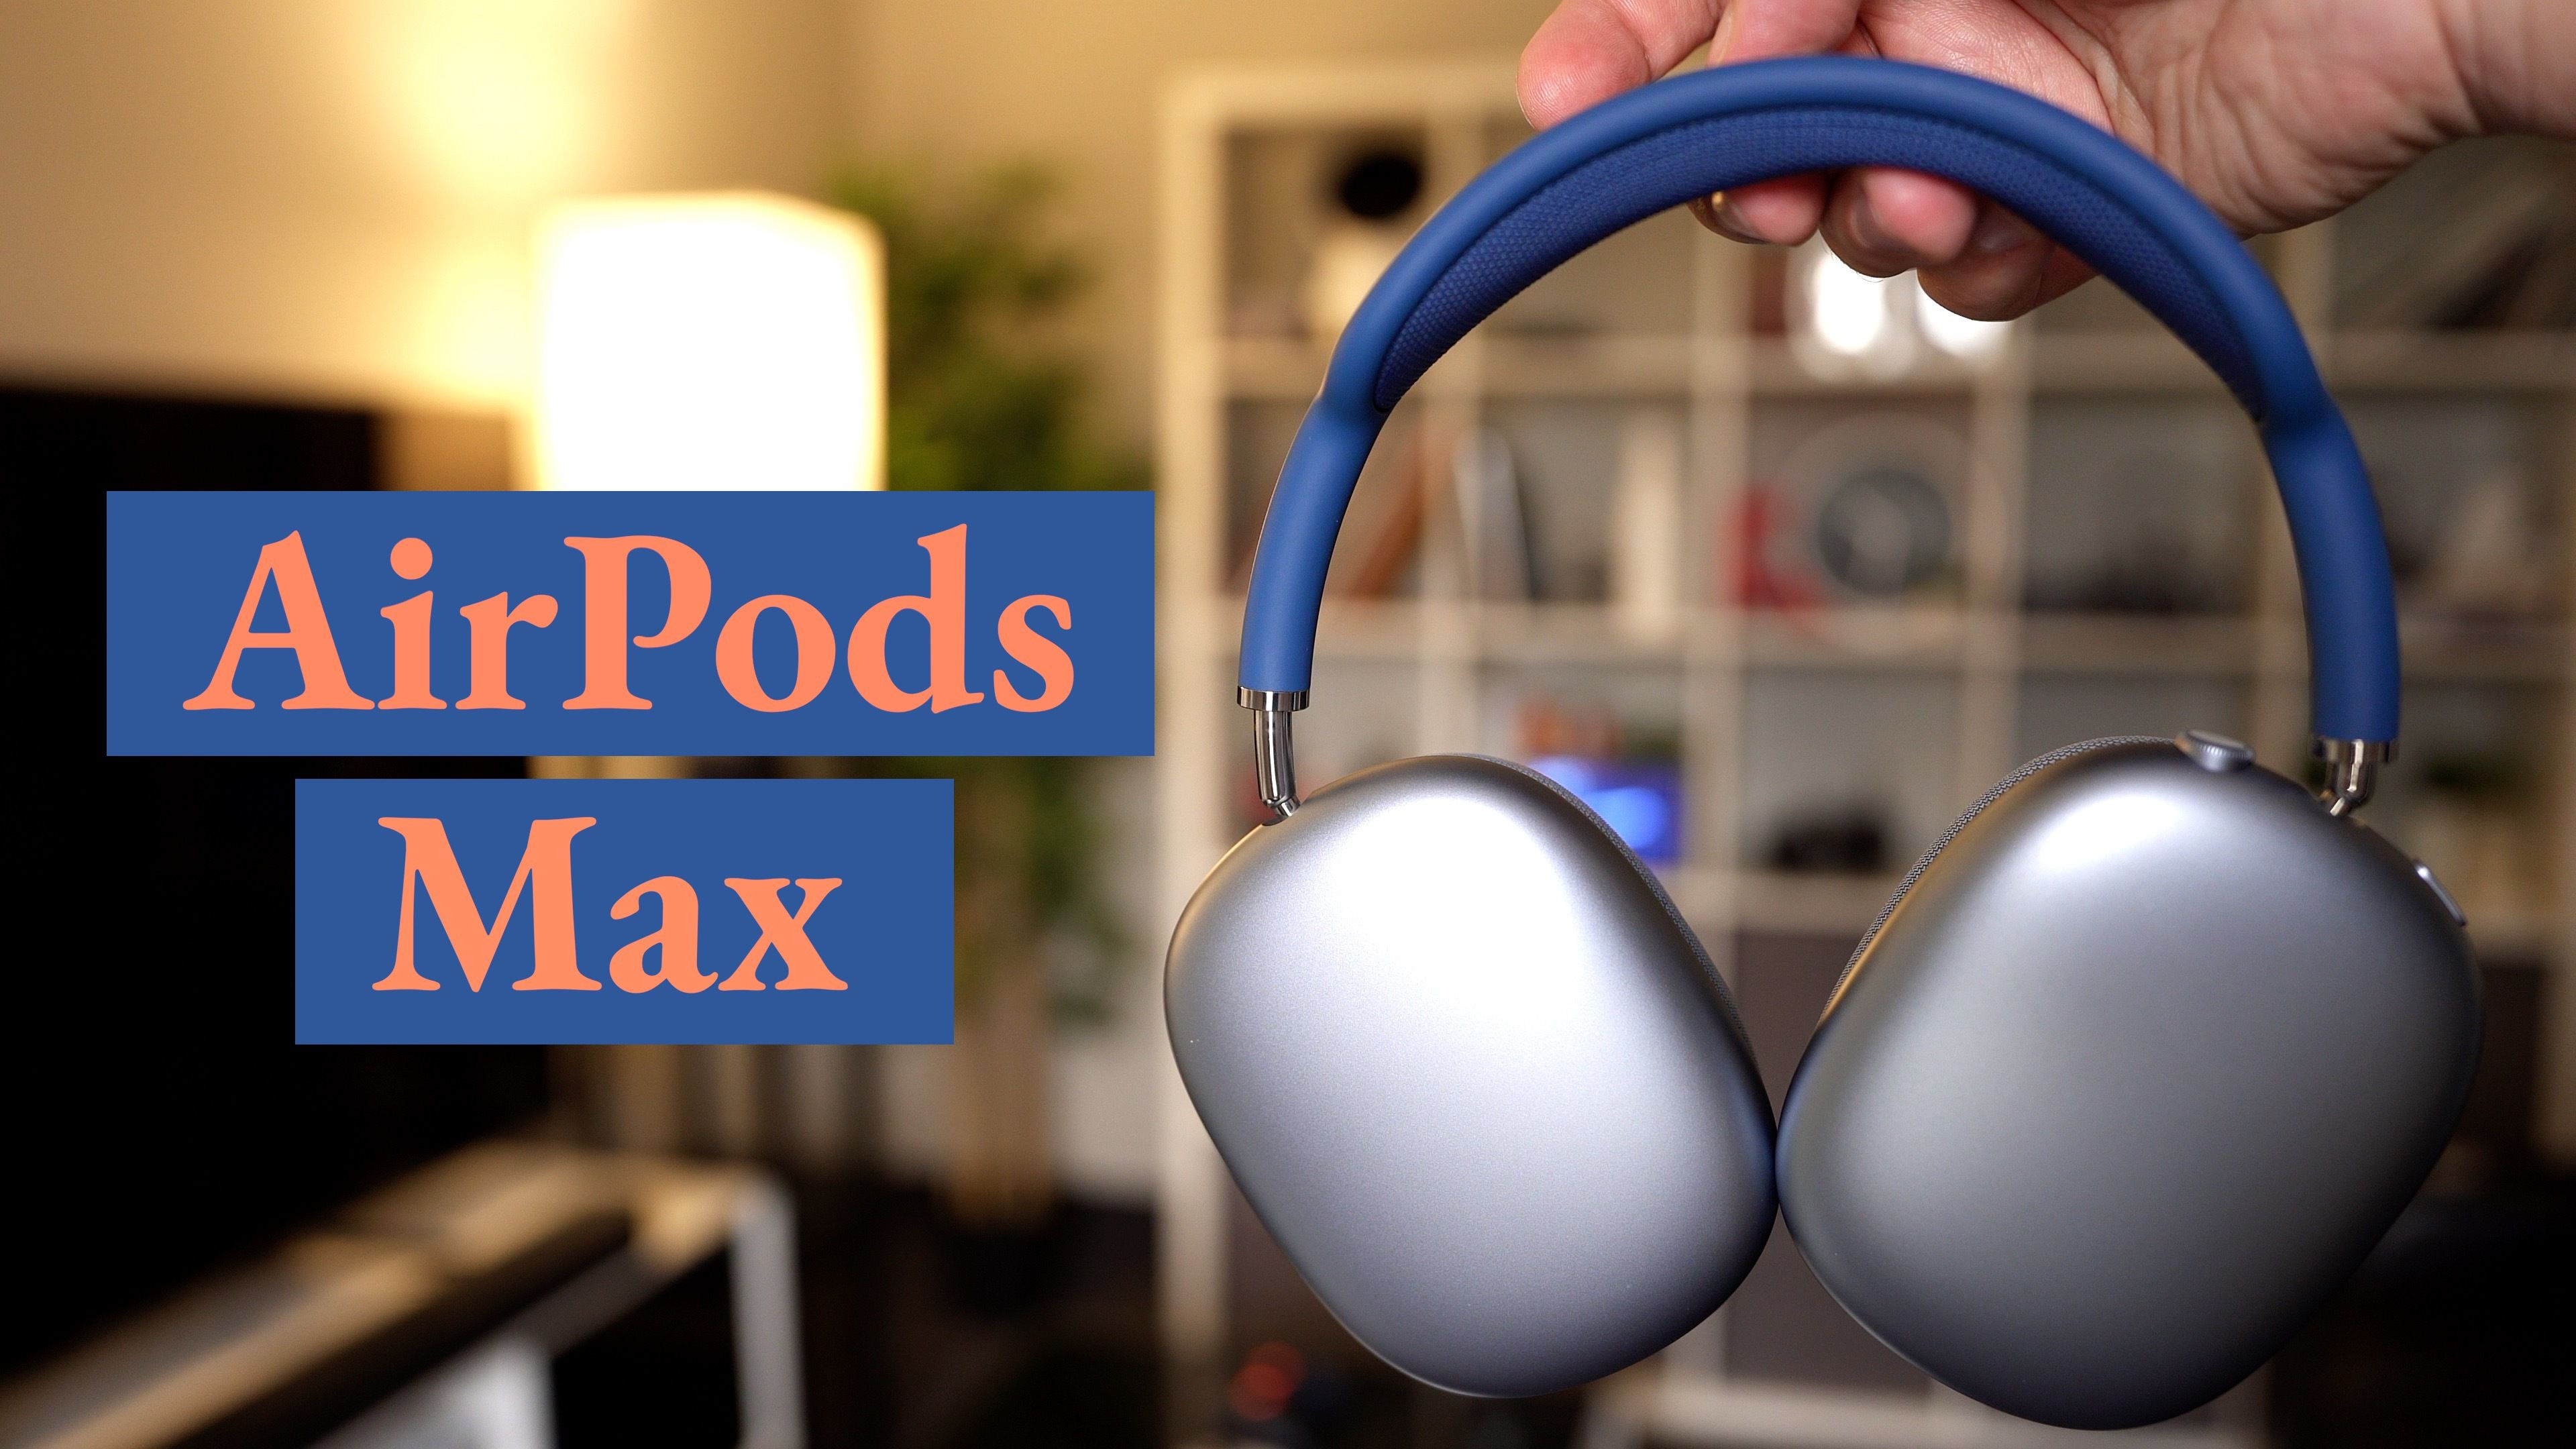 Five reasons why you might want to consider AirPods Max